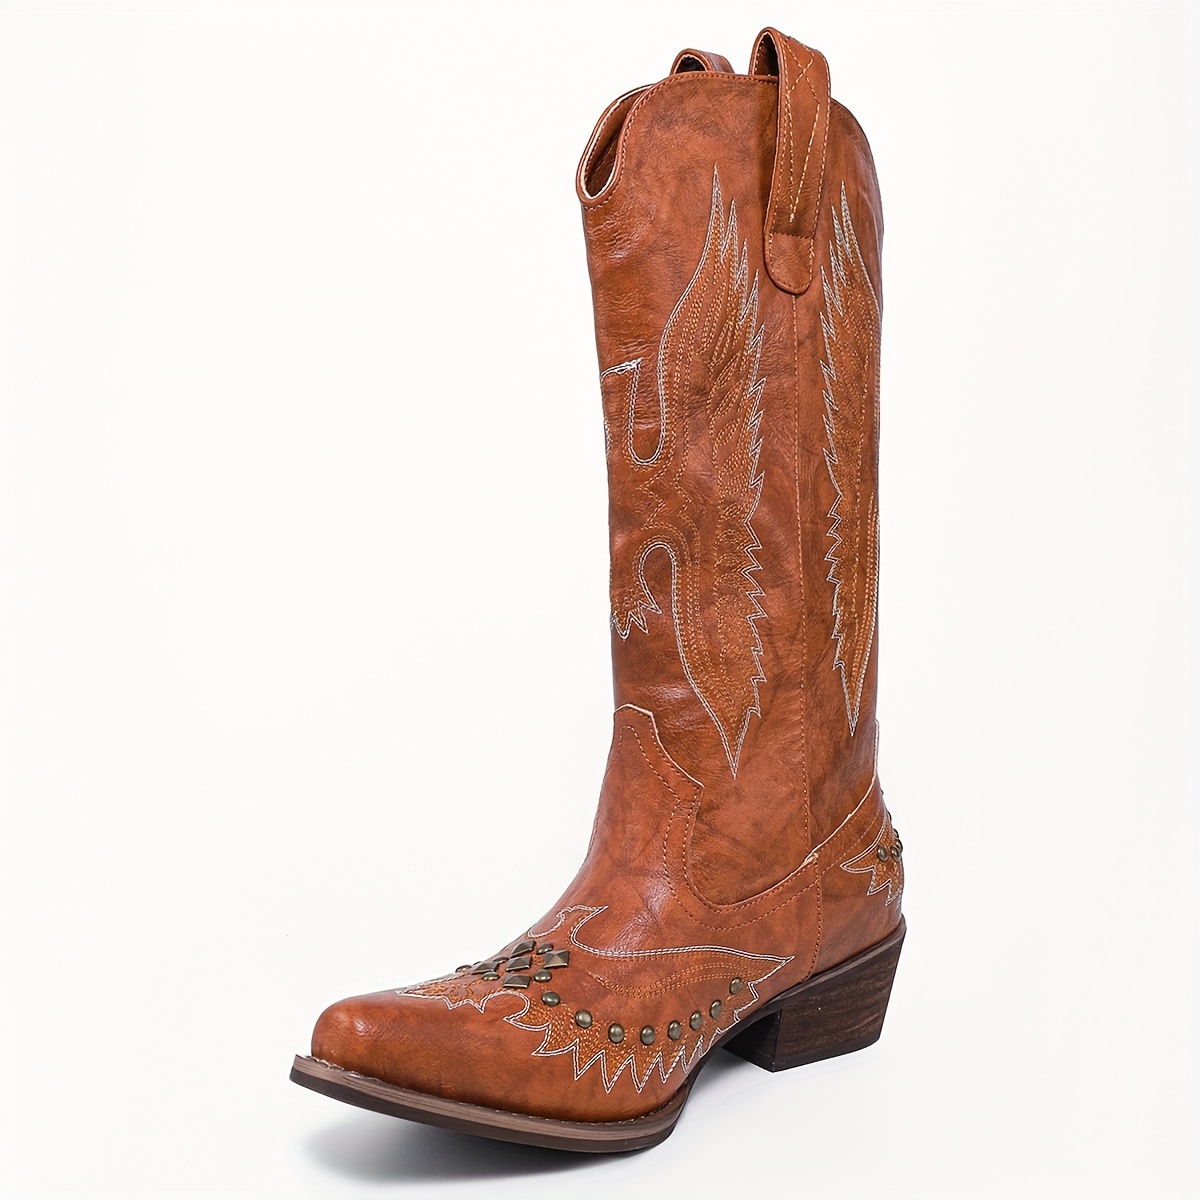 

Women's Studded Western Cowboy Boots, Retro V-cut Pull On Chunky Heeled Boots, All-match Mid Calf Boots